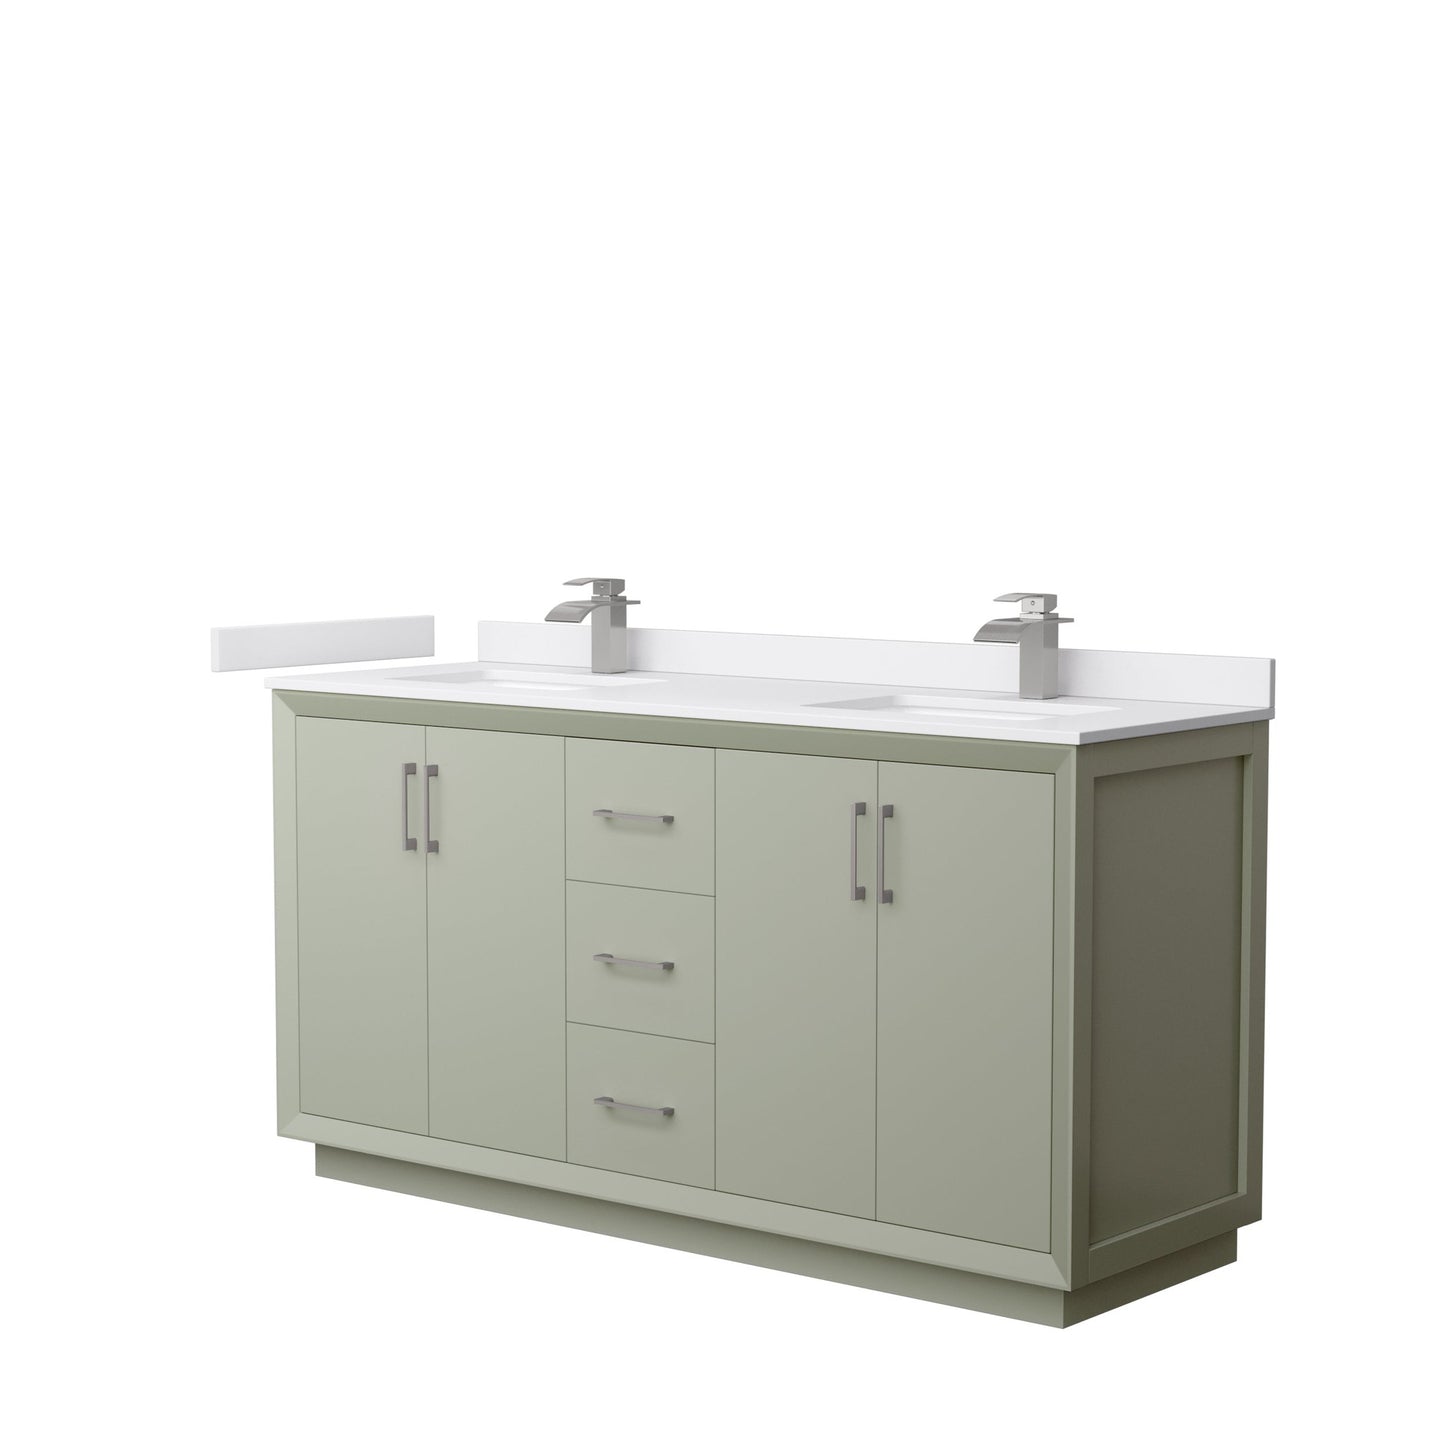 Wyndham Collection Strada 66" Double Bathroom Vanity in Light Green, White Cultured Marble Countertop, Undermount Square Sinks, Brushed Nickel Trim